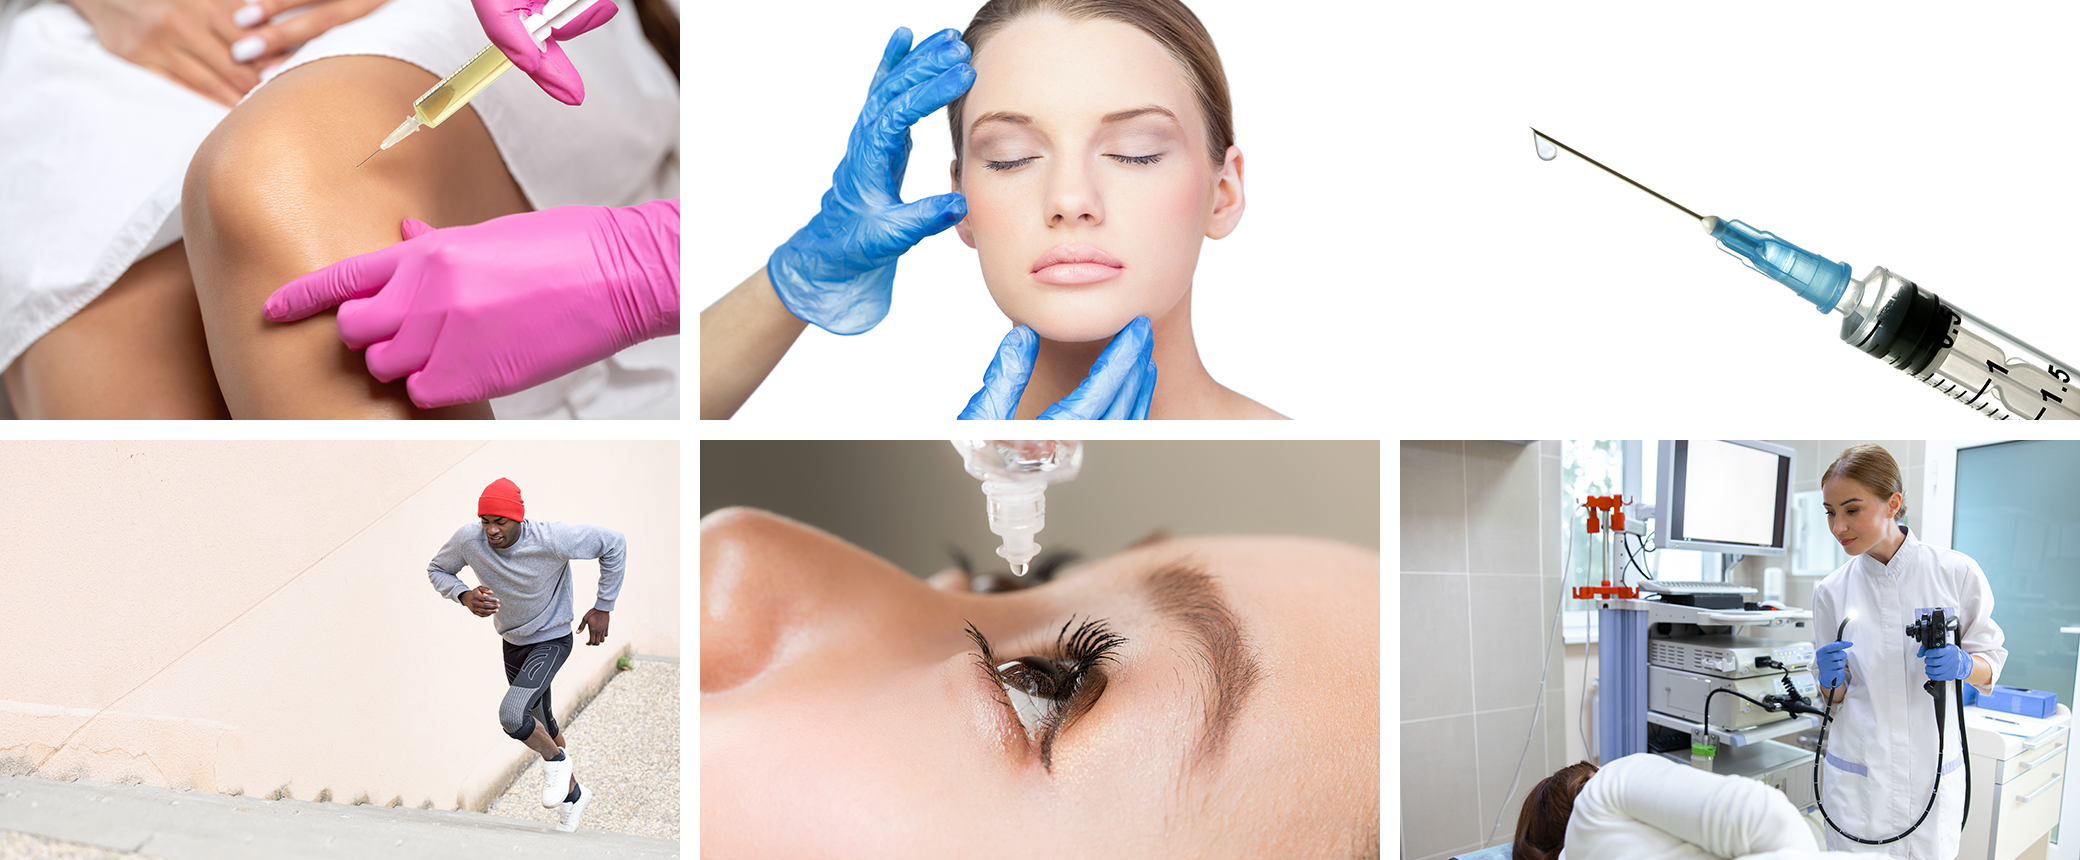 Benefits of using Hyaluronic acid in the pharmaceutical field